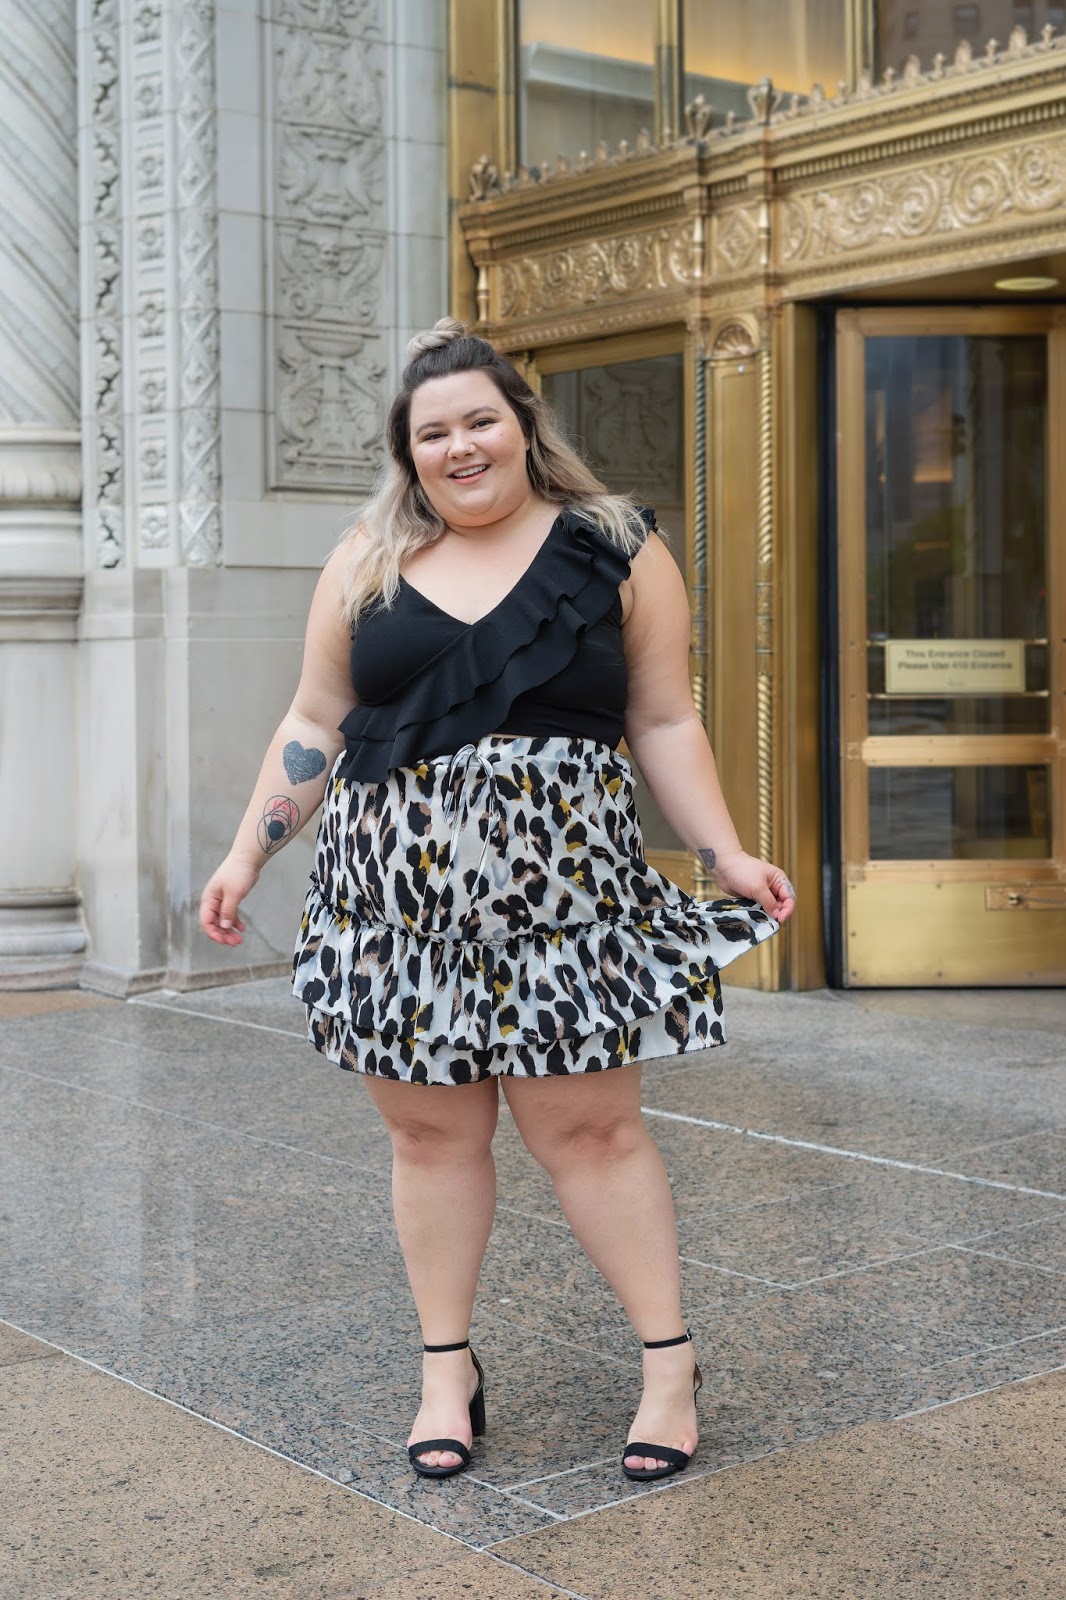 Chicago Plus Size Petite Fashion Blogger Natalie in the City reviews SheIn's mini skirts and crop tops.